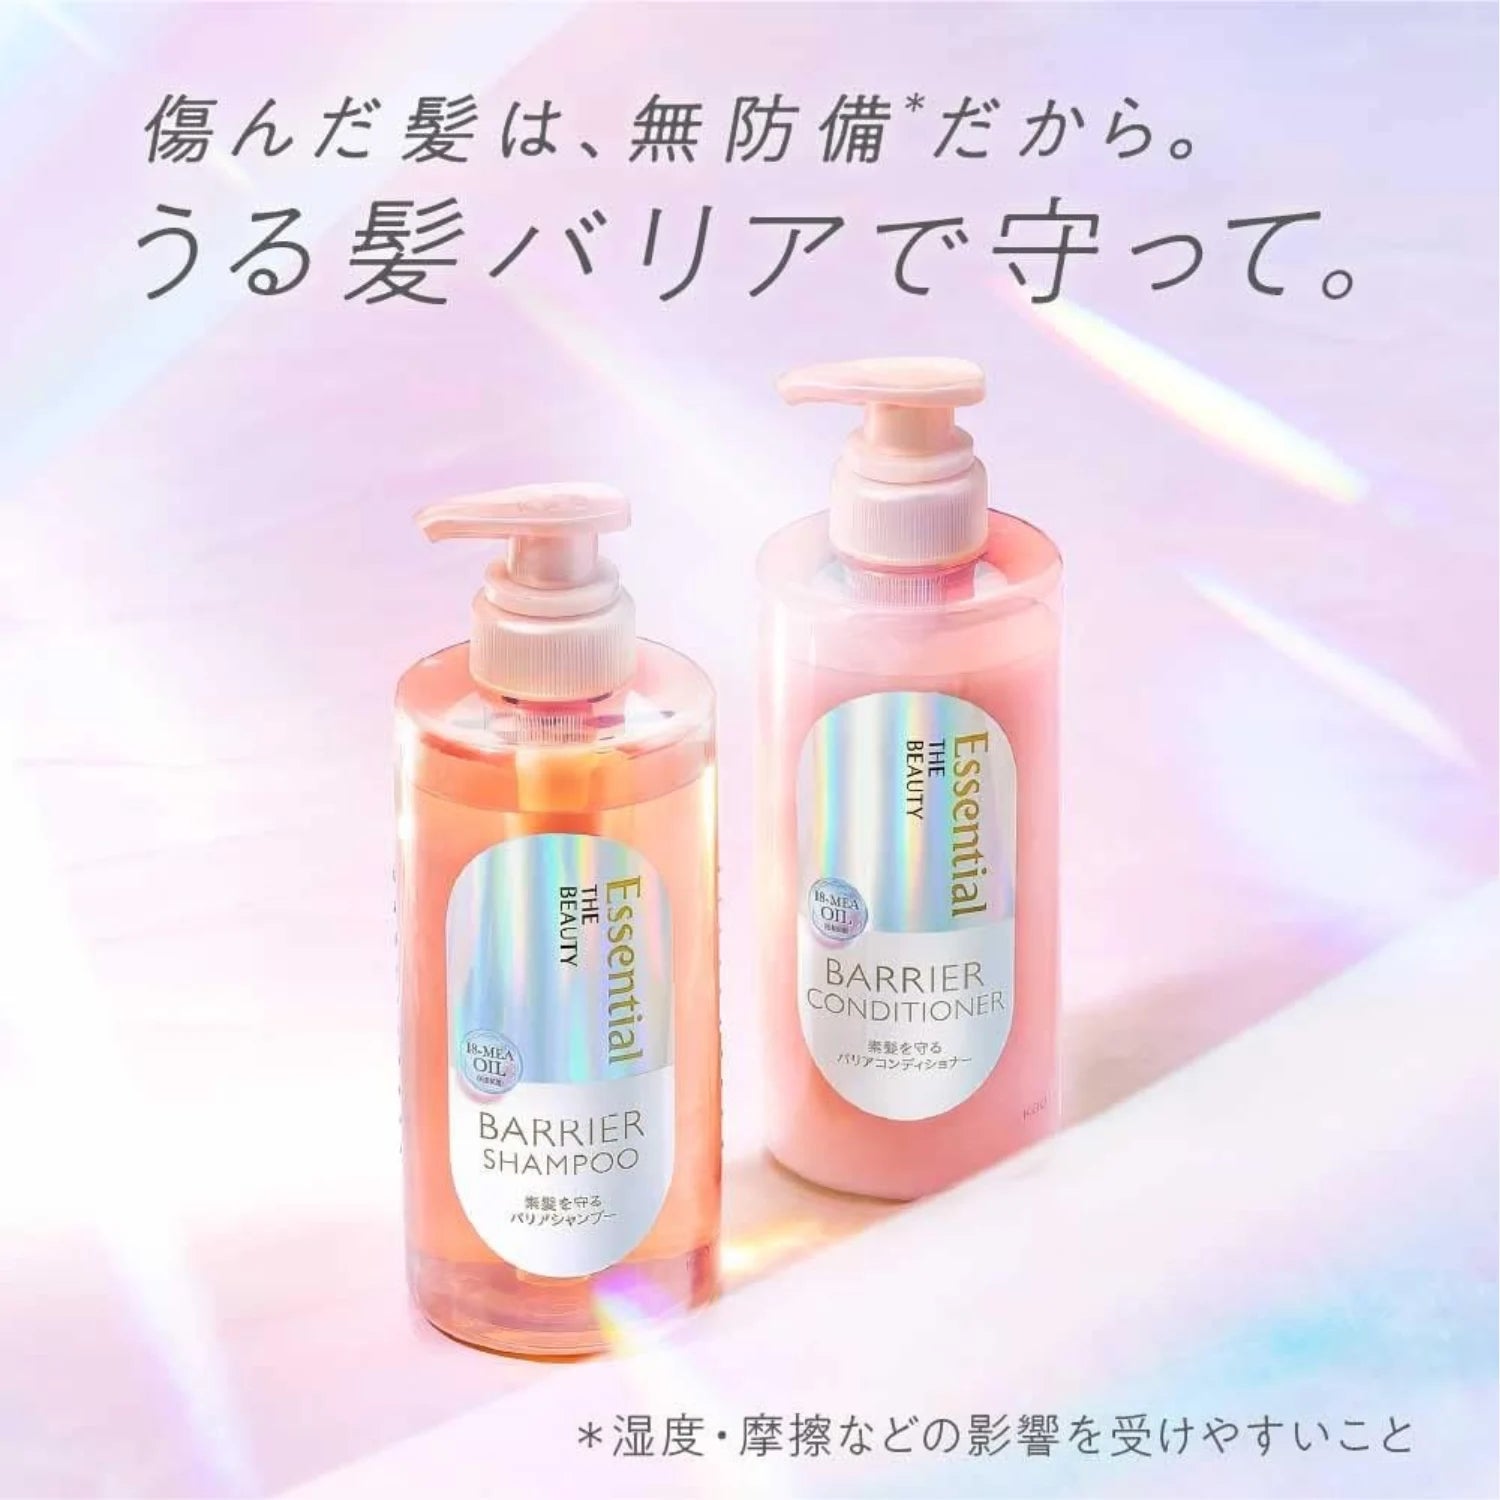 Kao Essential The Beauty Barrier Shampoo, Conditioner, Watery Treatment Set (450ml x2 + 200ml) - Buy Me Japan